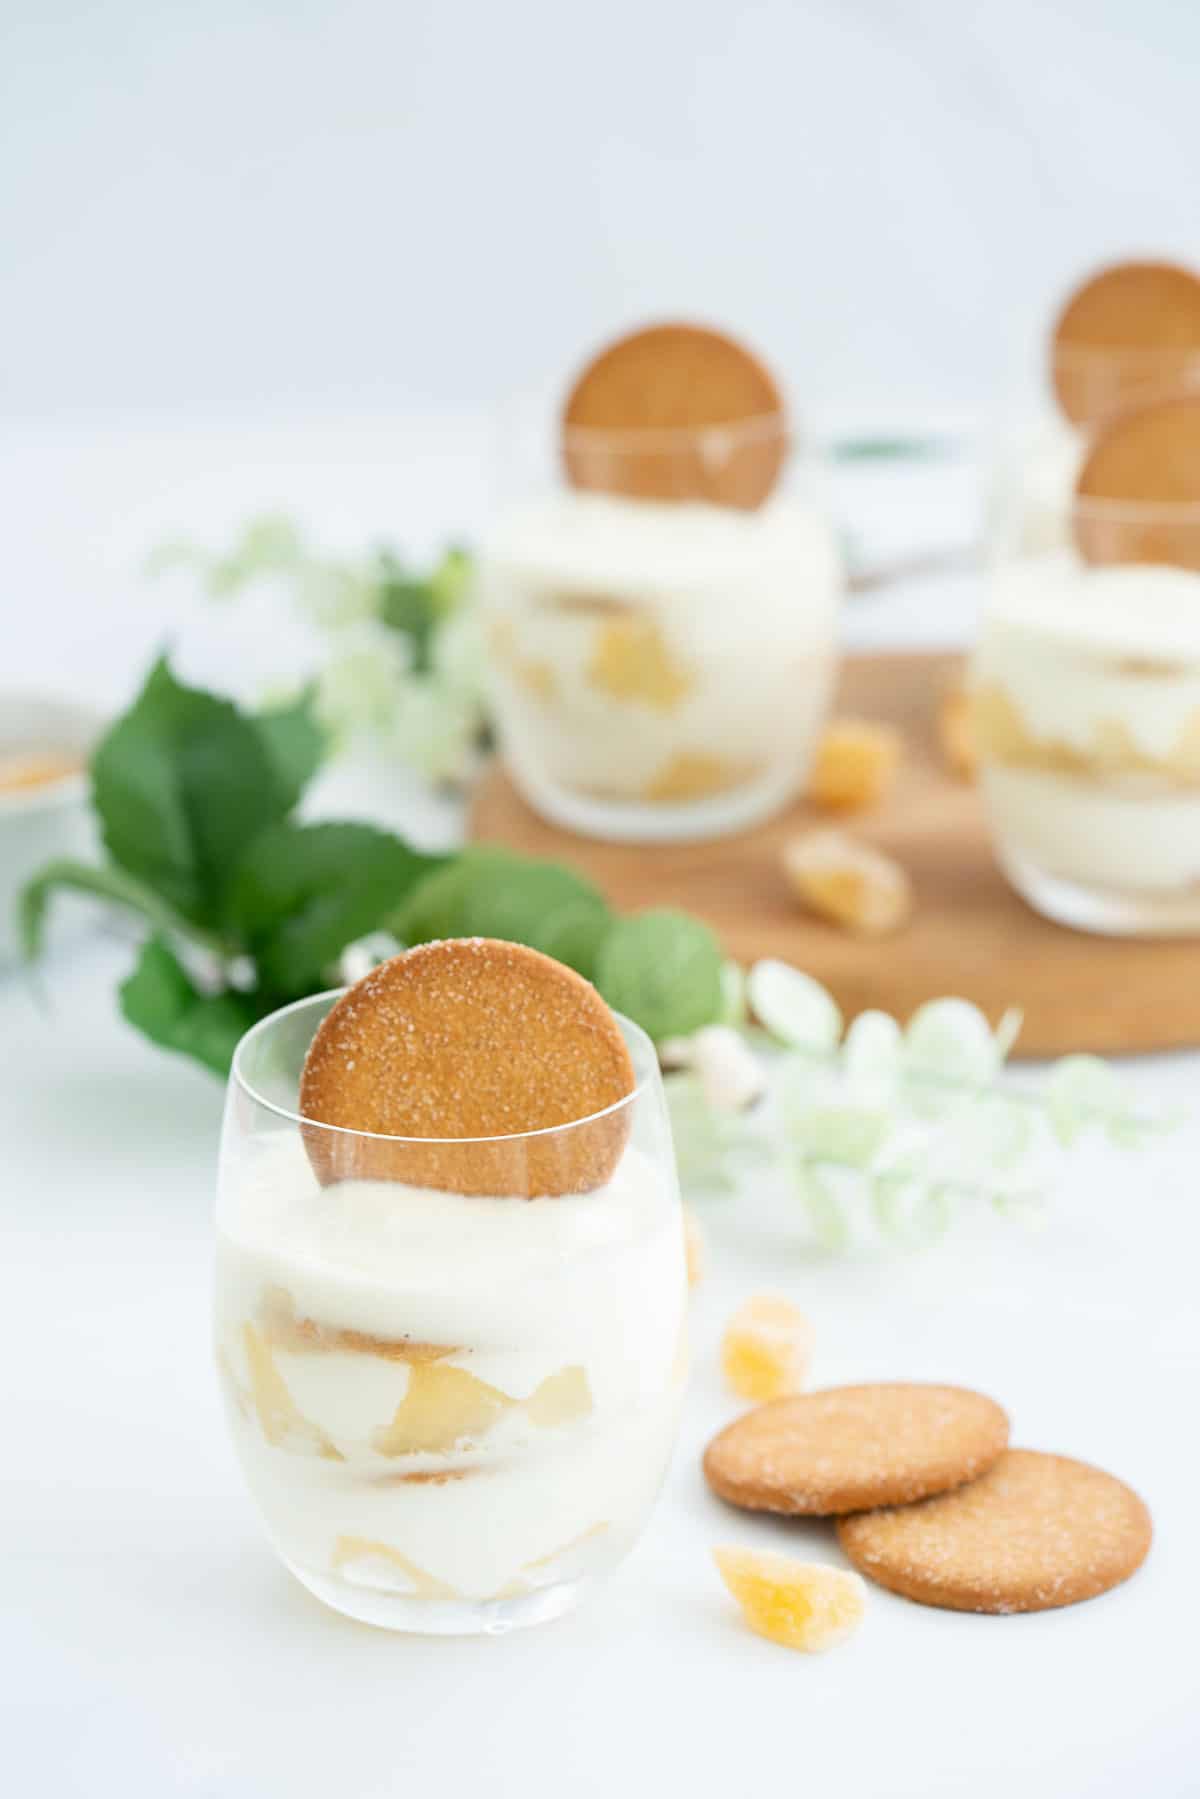 A layered dessert of yogurt, pears and ginger nut biscuits in a glass.